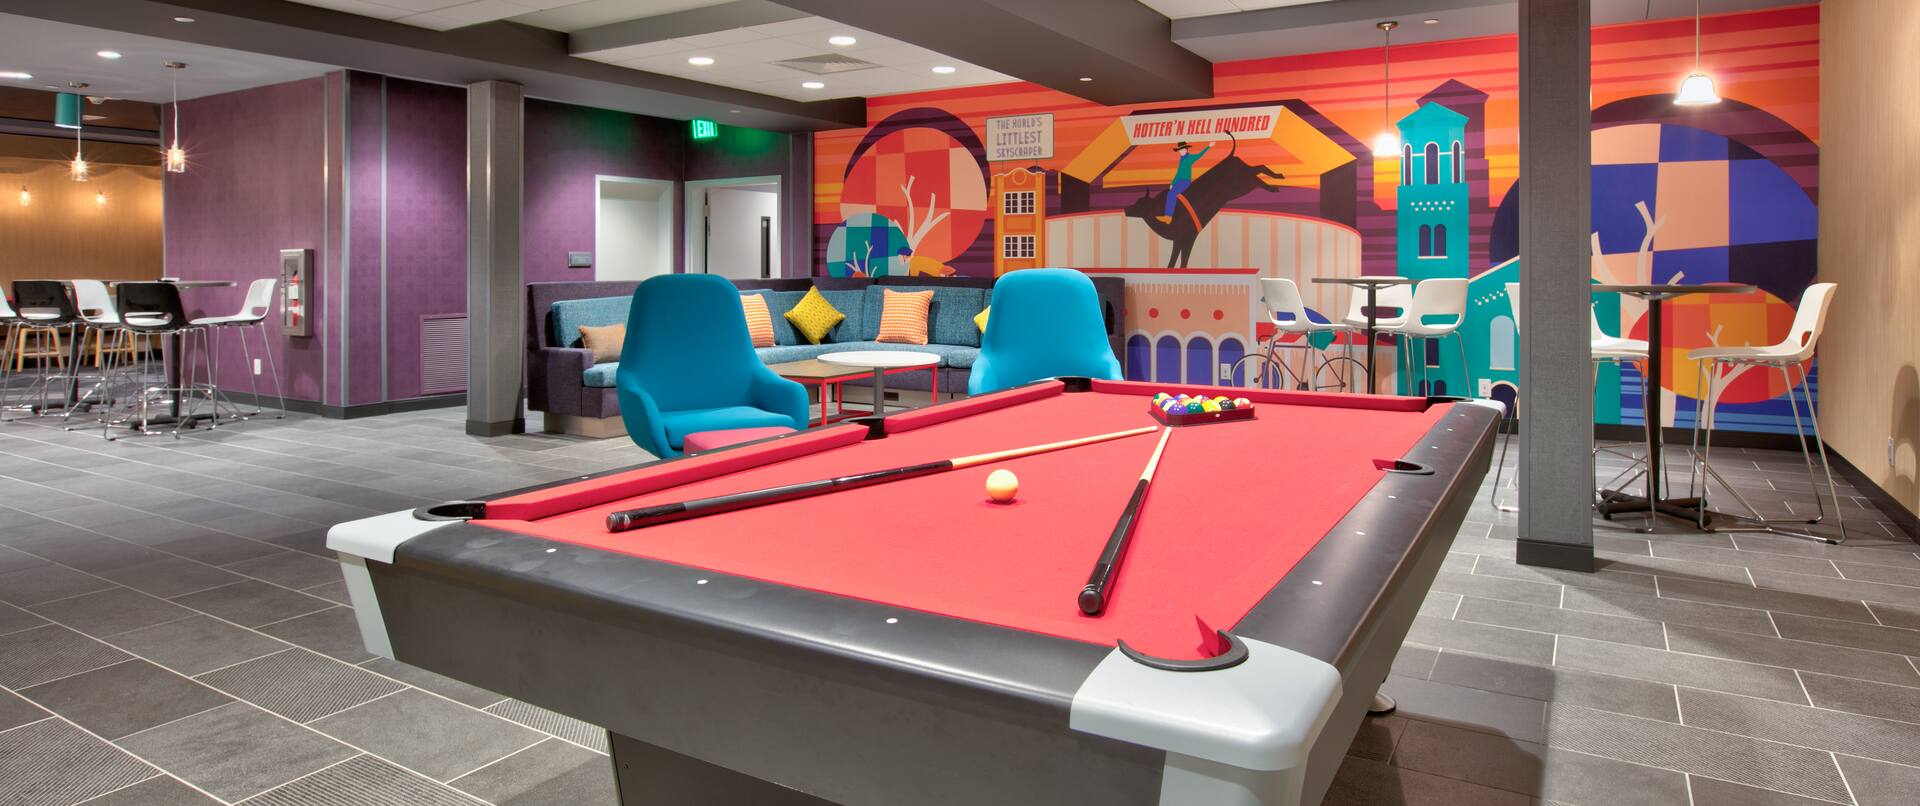  Recreational Area With Pool Table